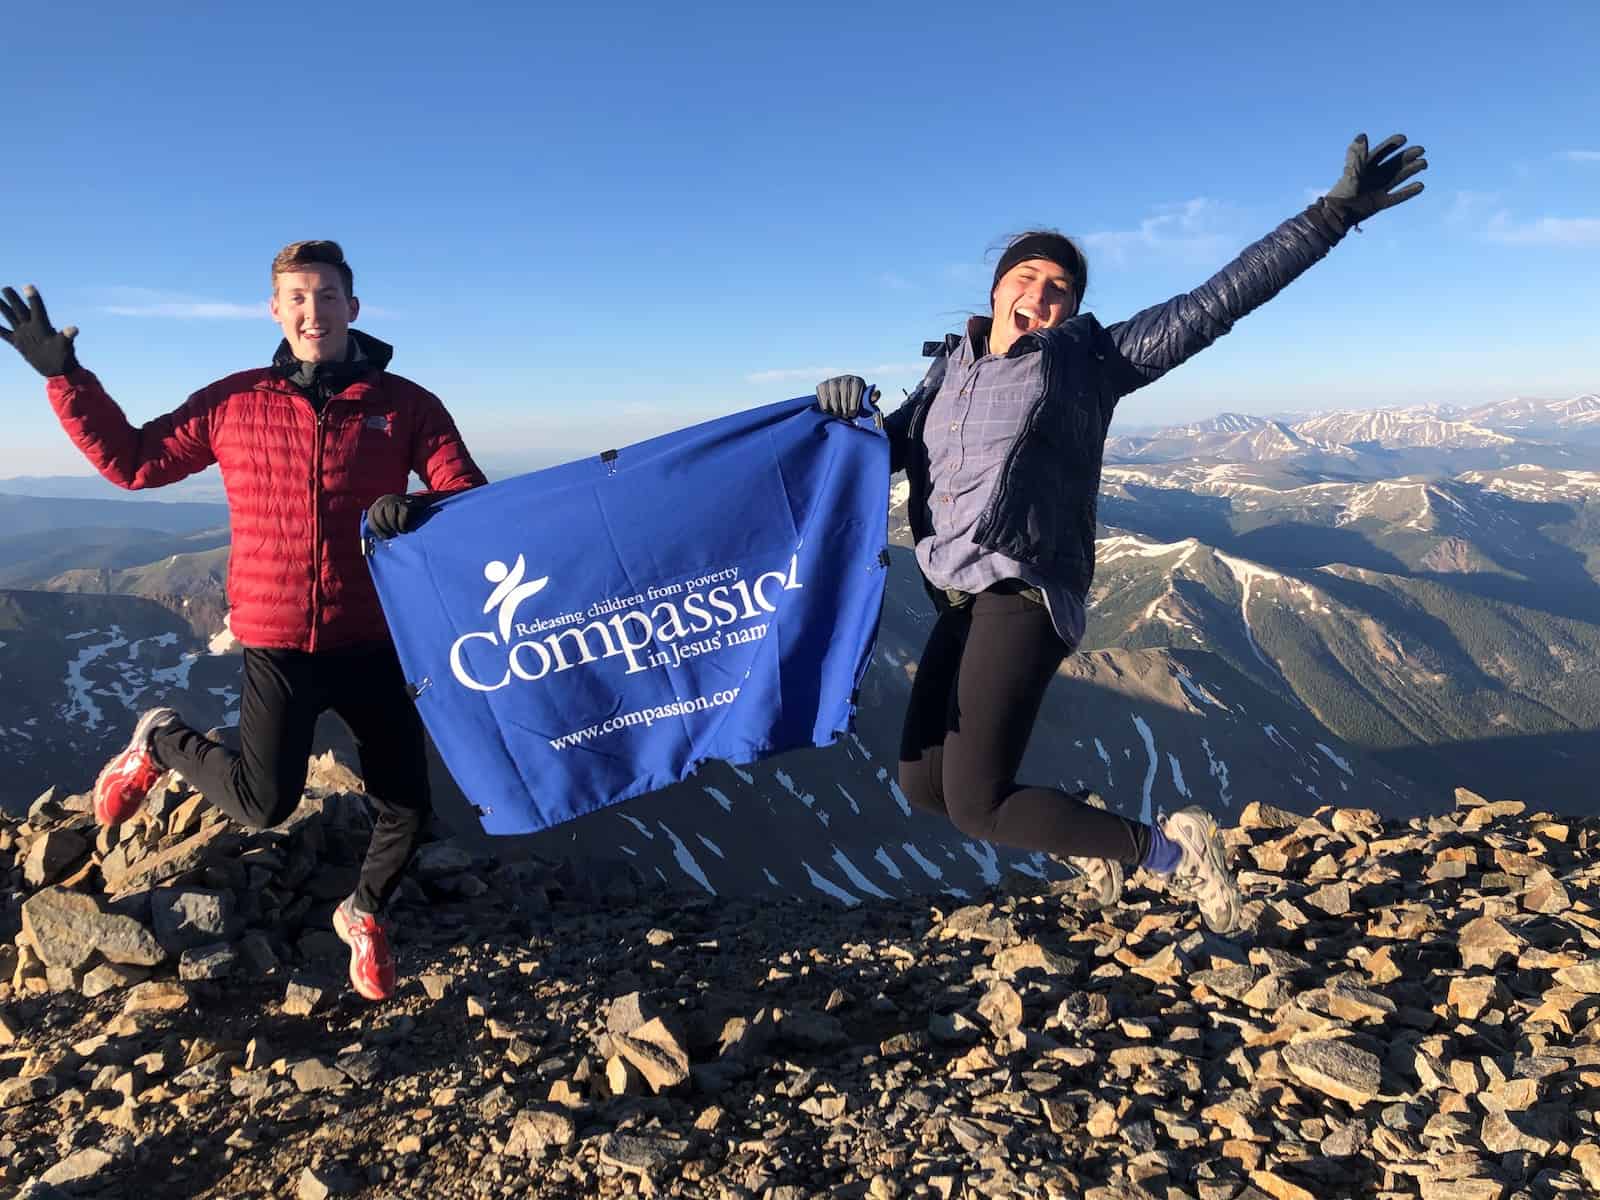 Two people jump in the air, holding a banner that says 'Compassion' on top of a mountain.